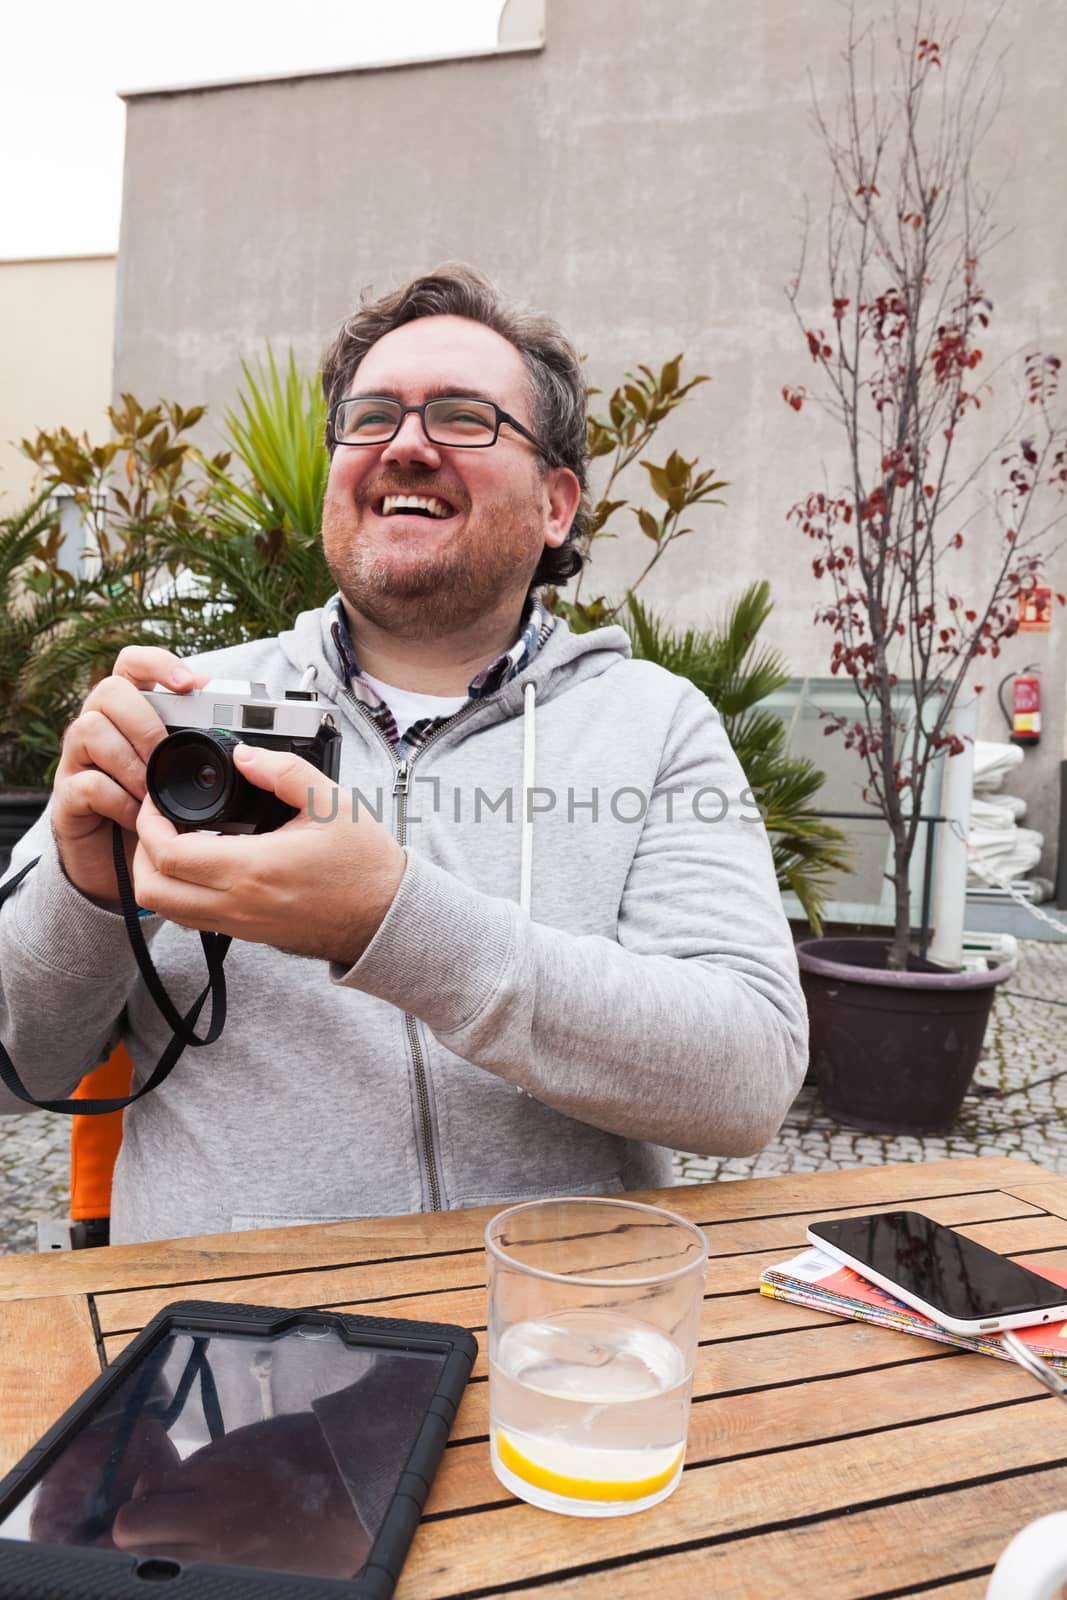 Young traveller man with glasses looking and laughing is having fun with a vintage camera